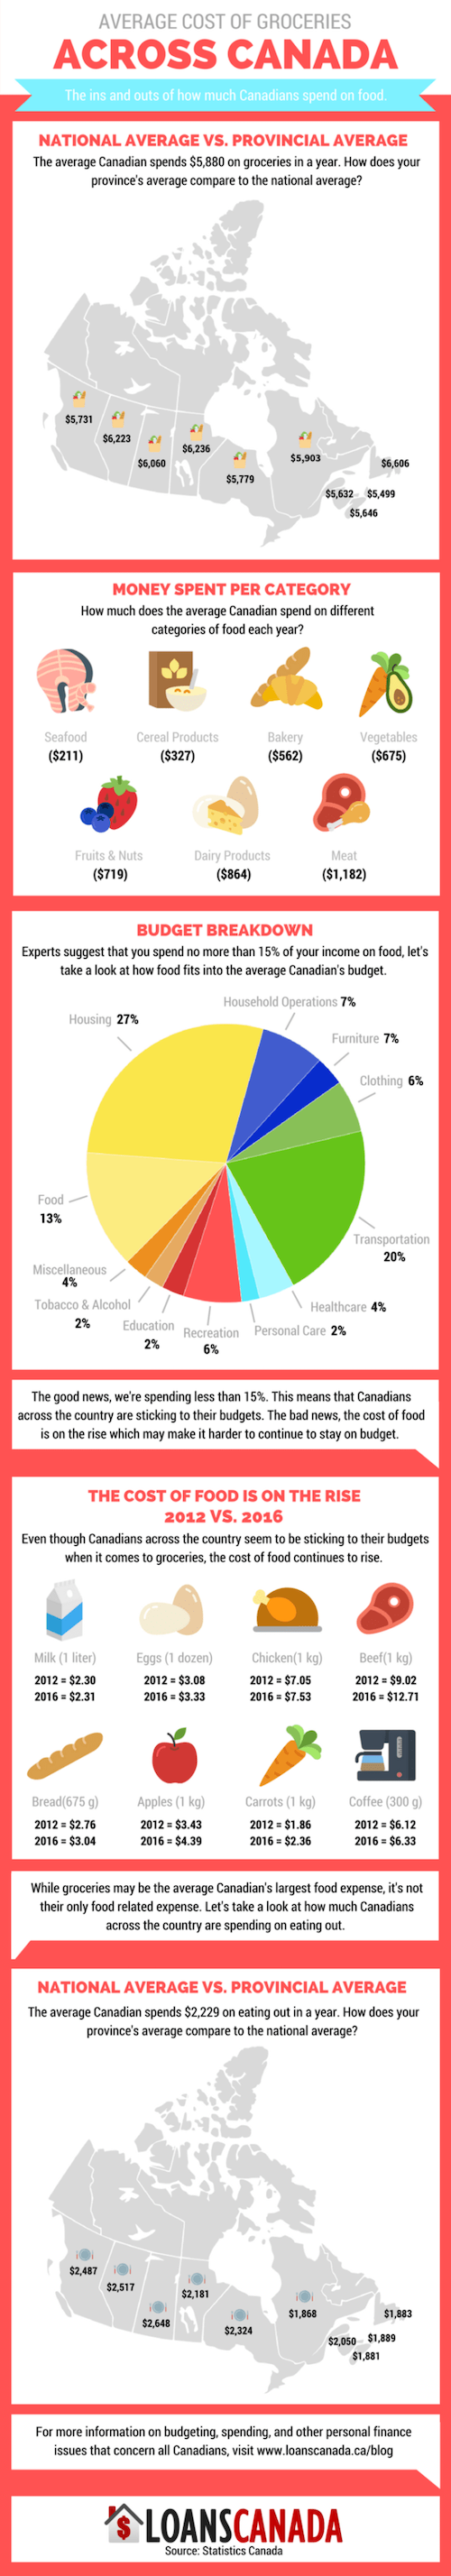 Infographic: average cost of groceries across Canada